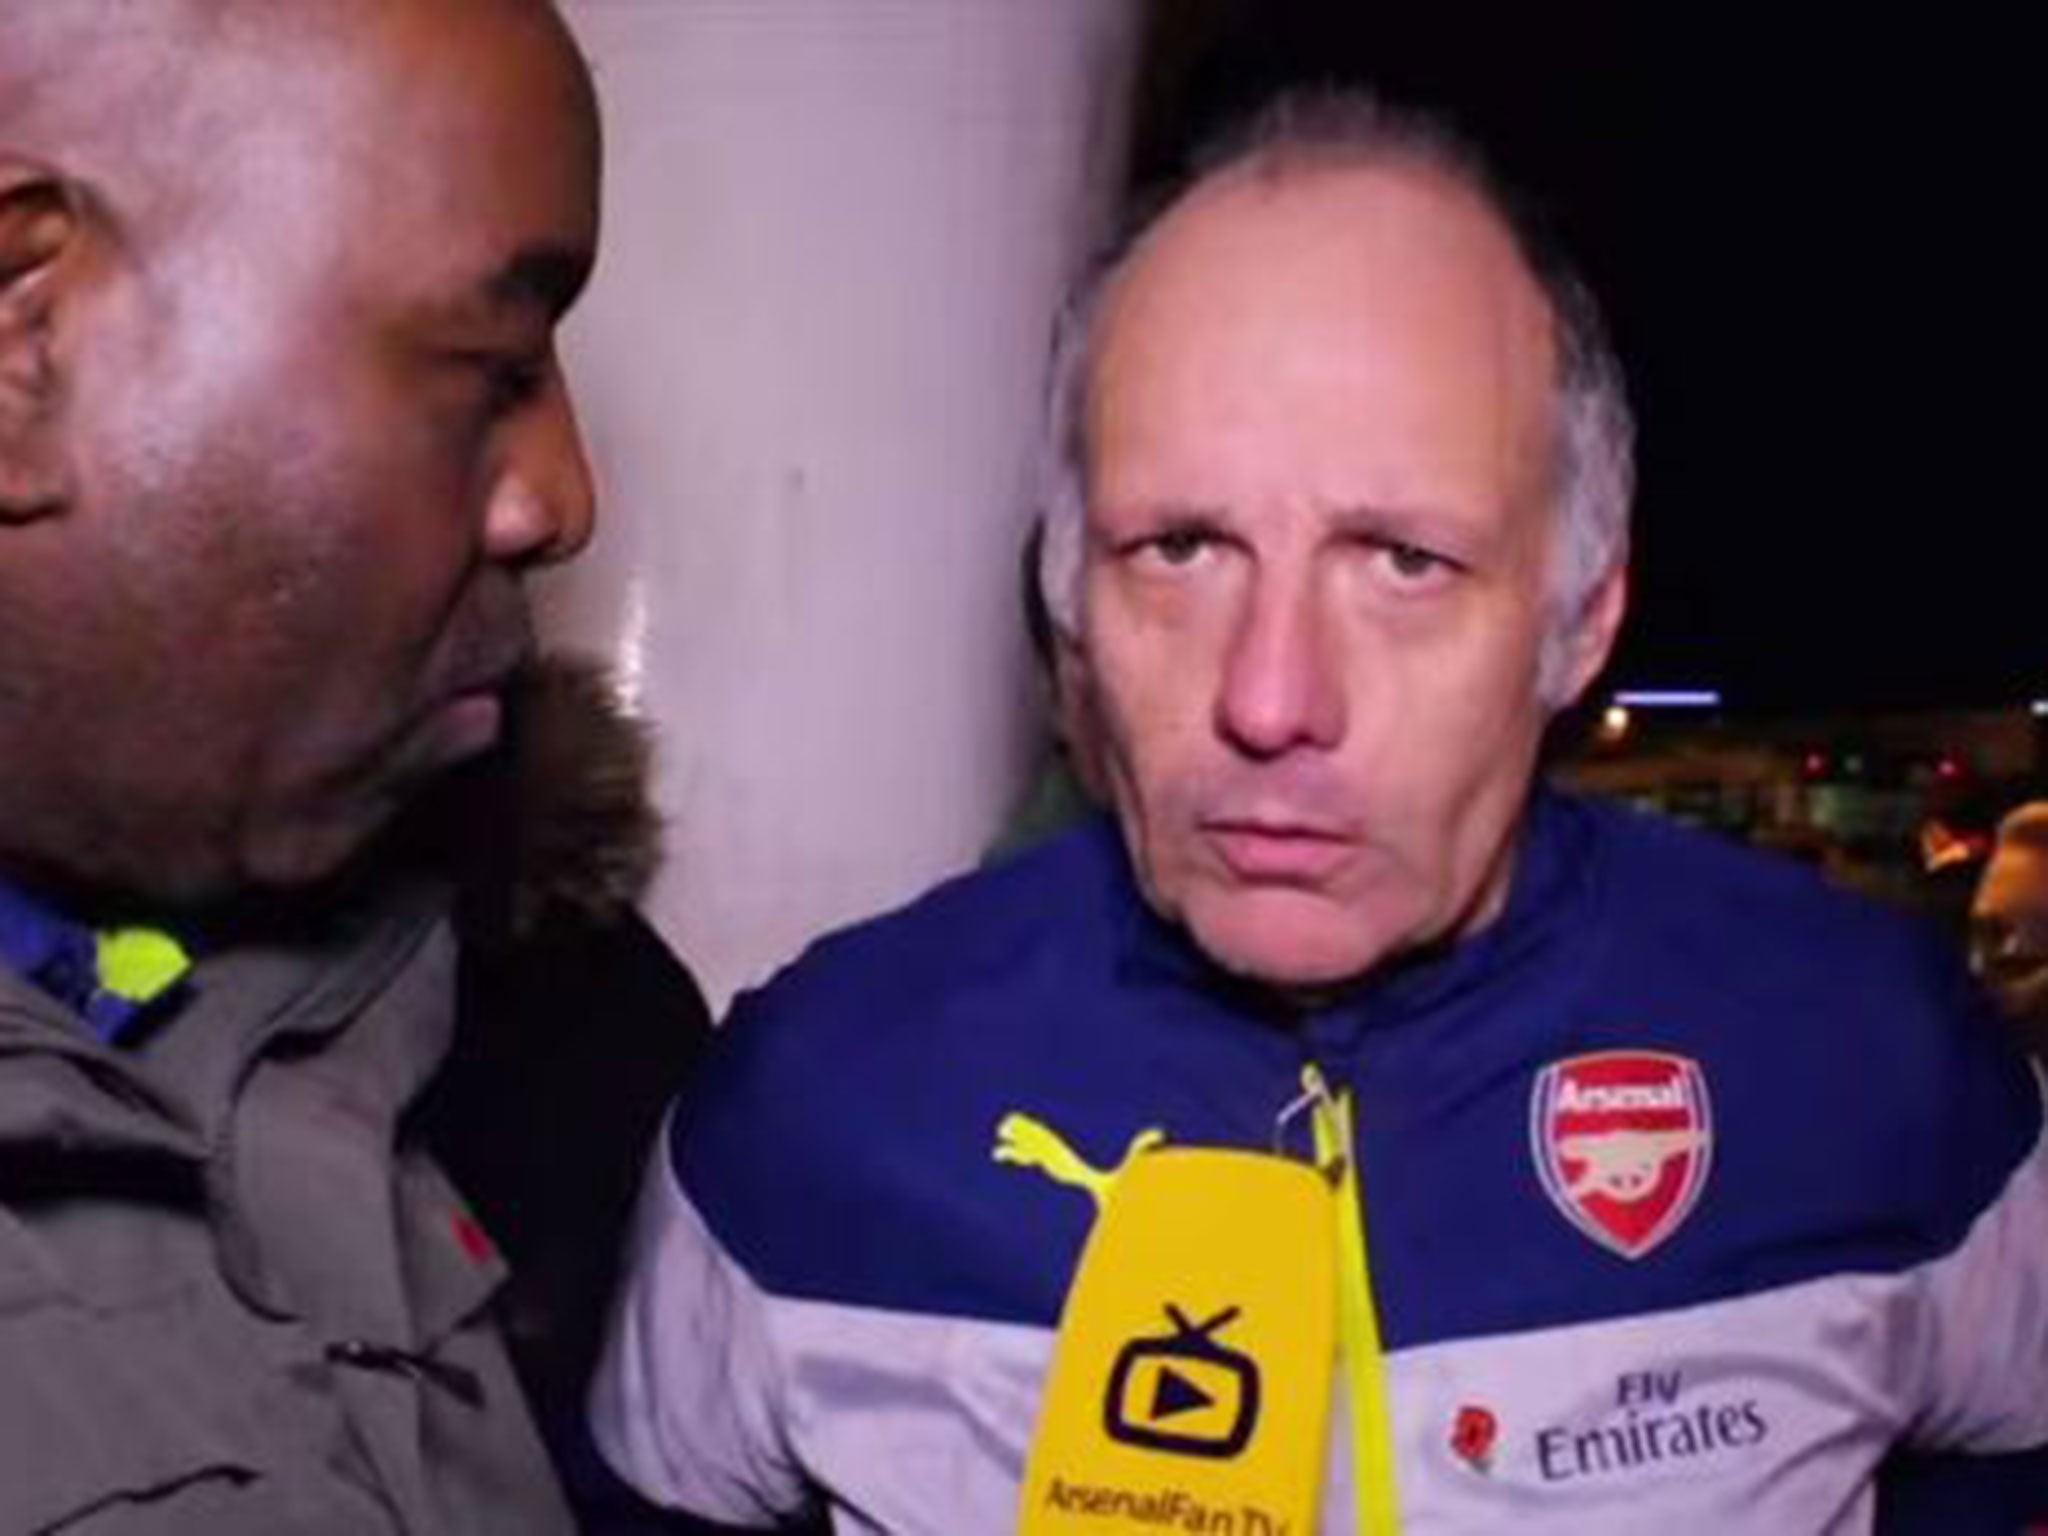 Swansea vs Arsenal Irate Arsenal fan Claude given social media treatment after fan reaction video goes viral The Independent The Independent